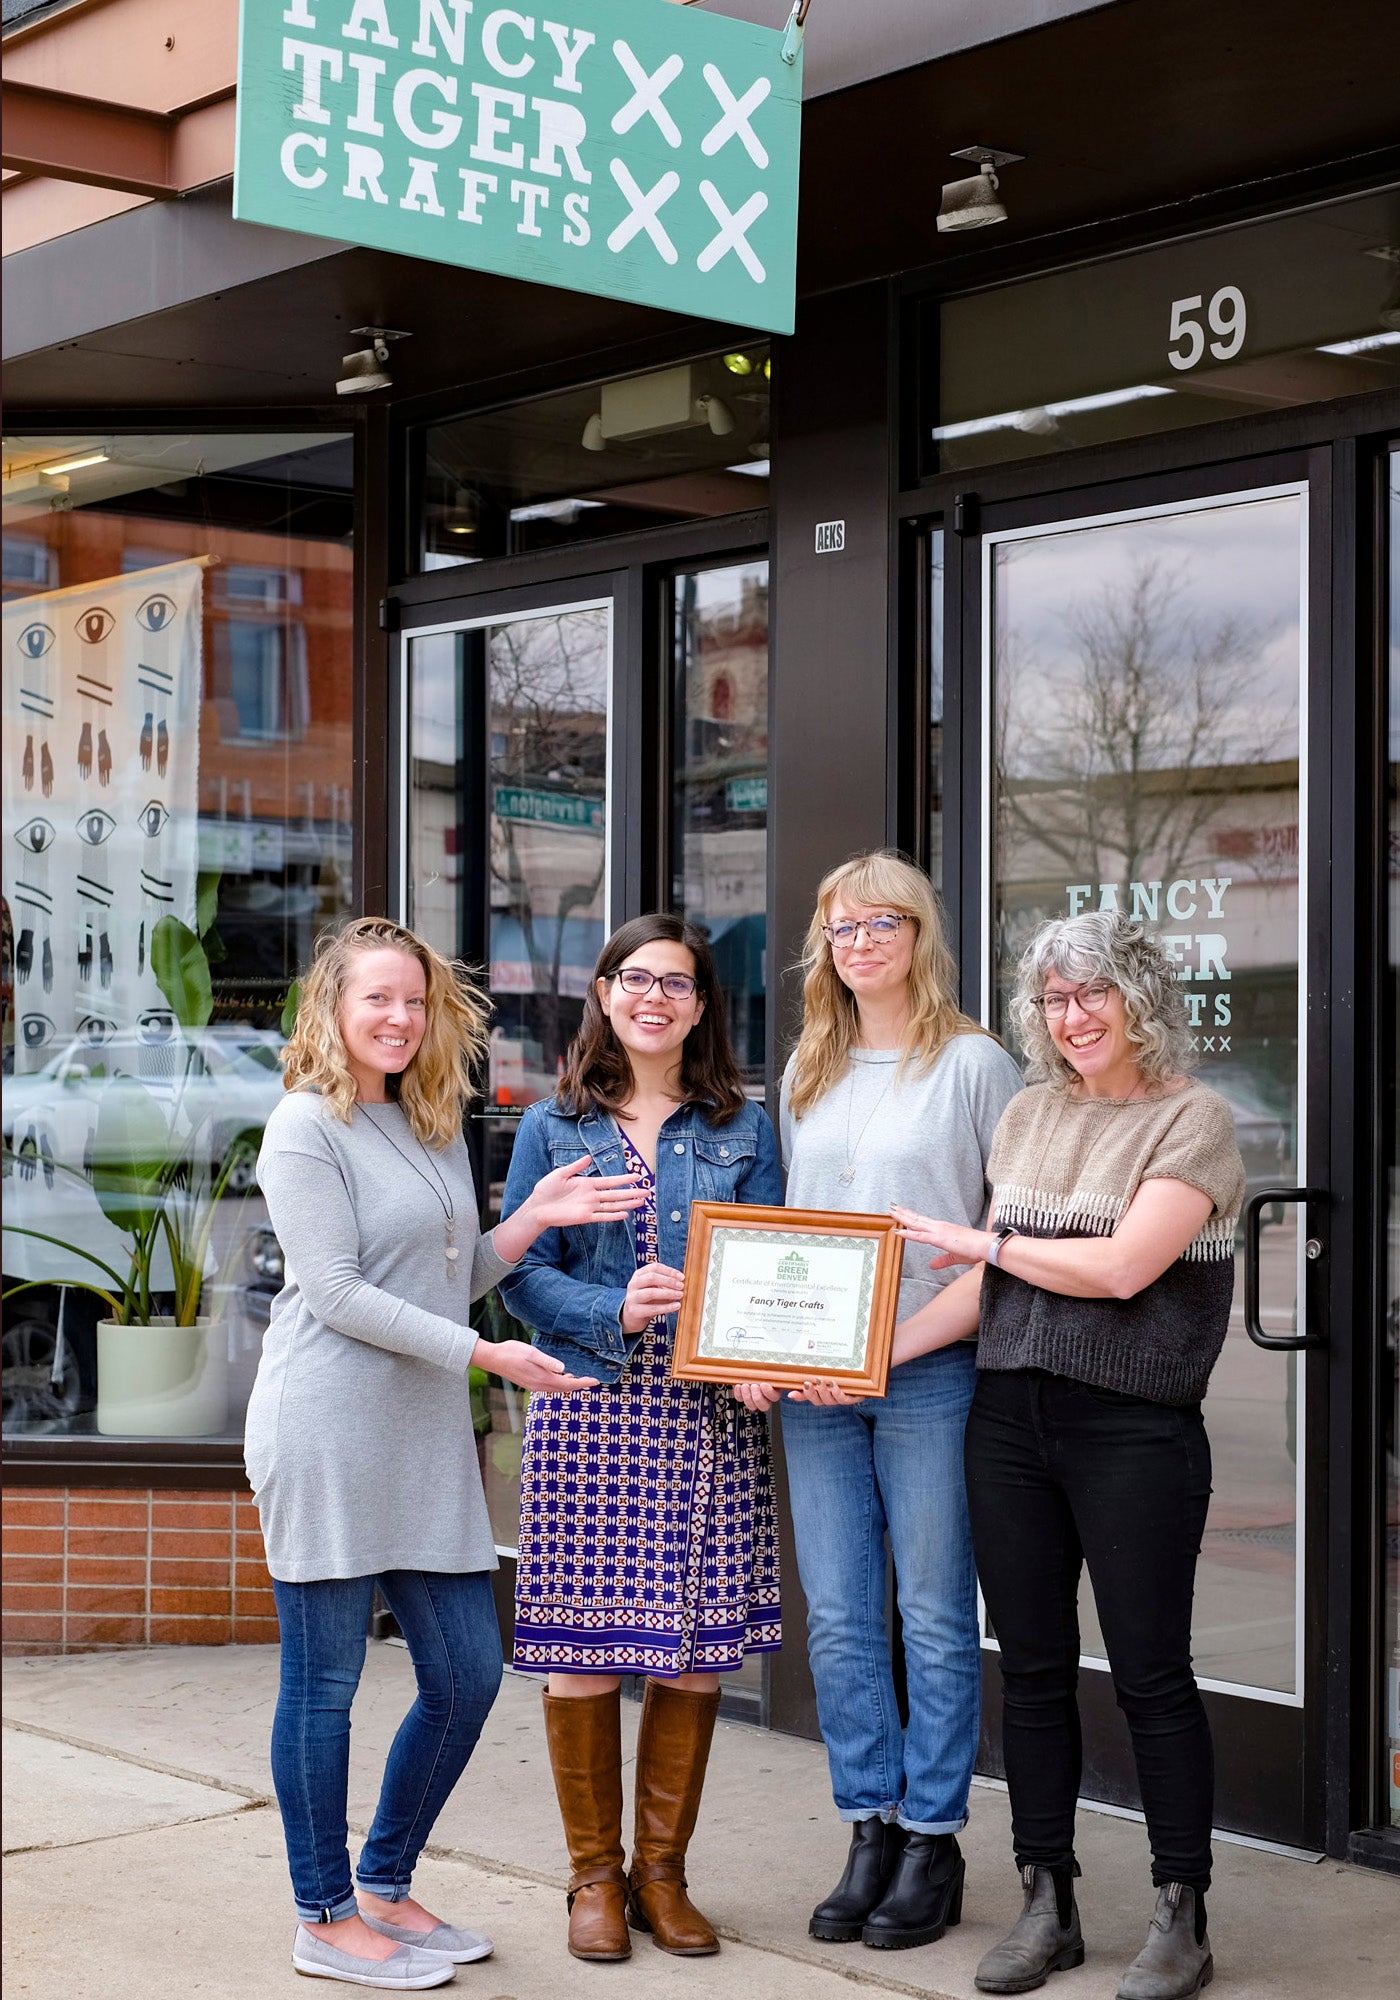 Fancy Tiger Crafts Green Team with the Certifiably Denver Certificate